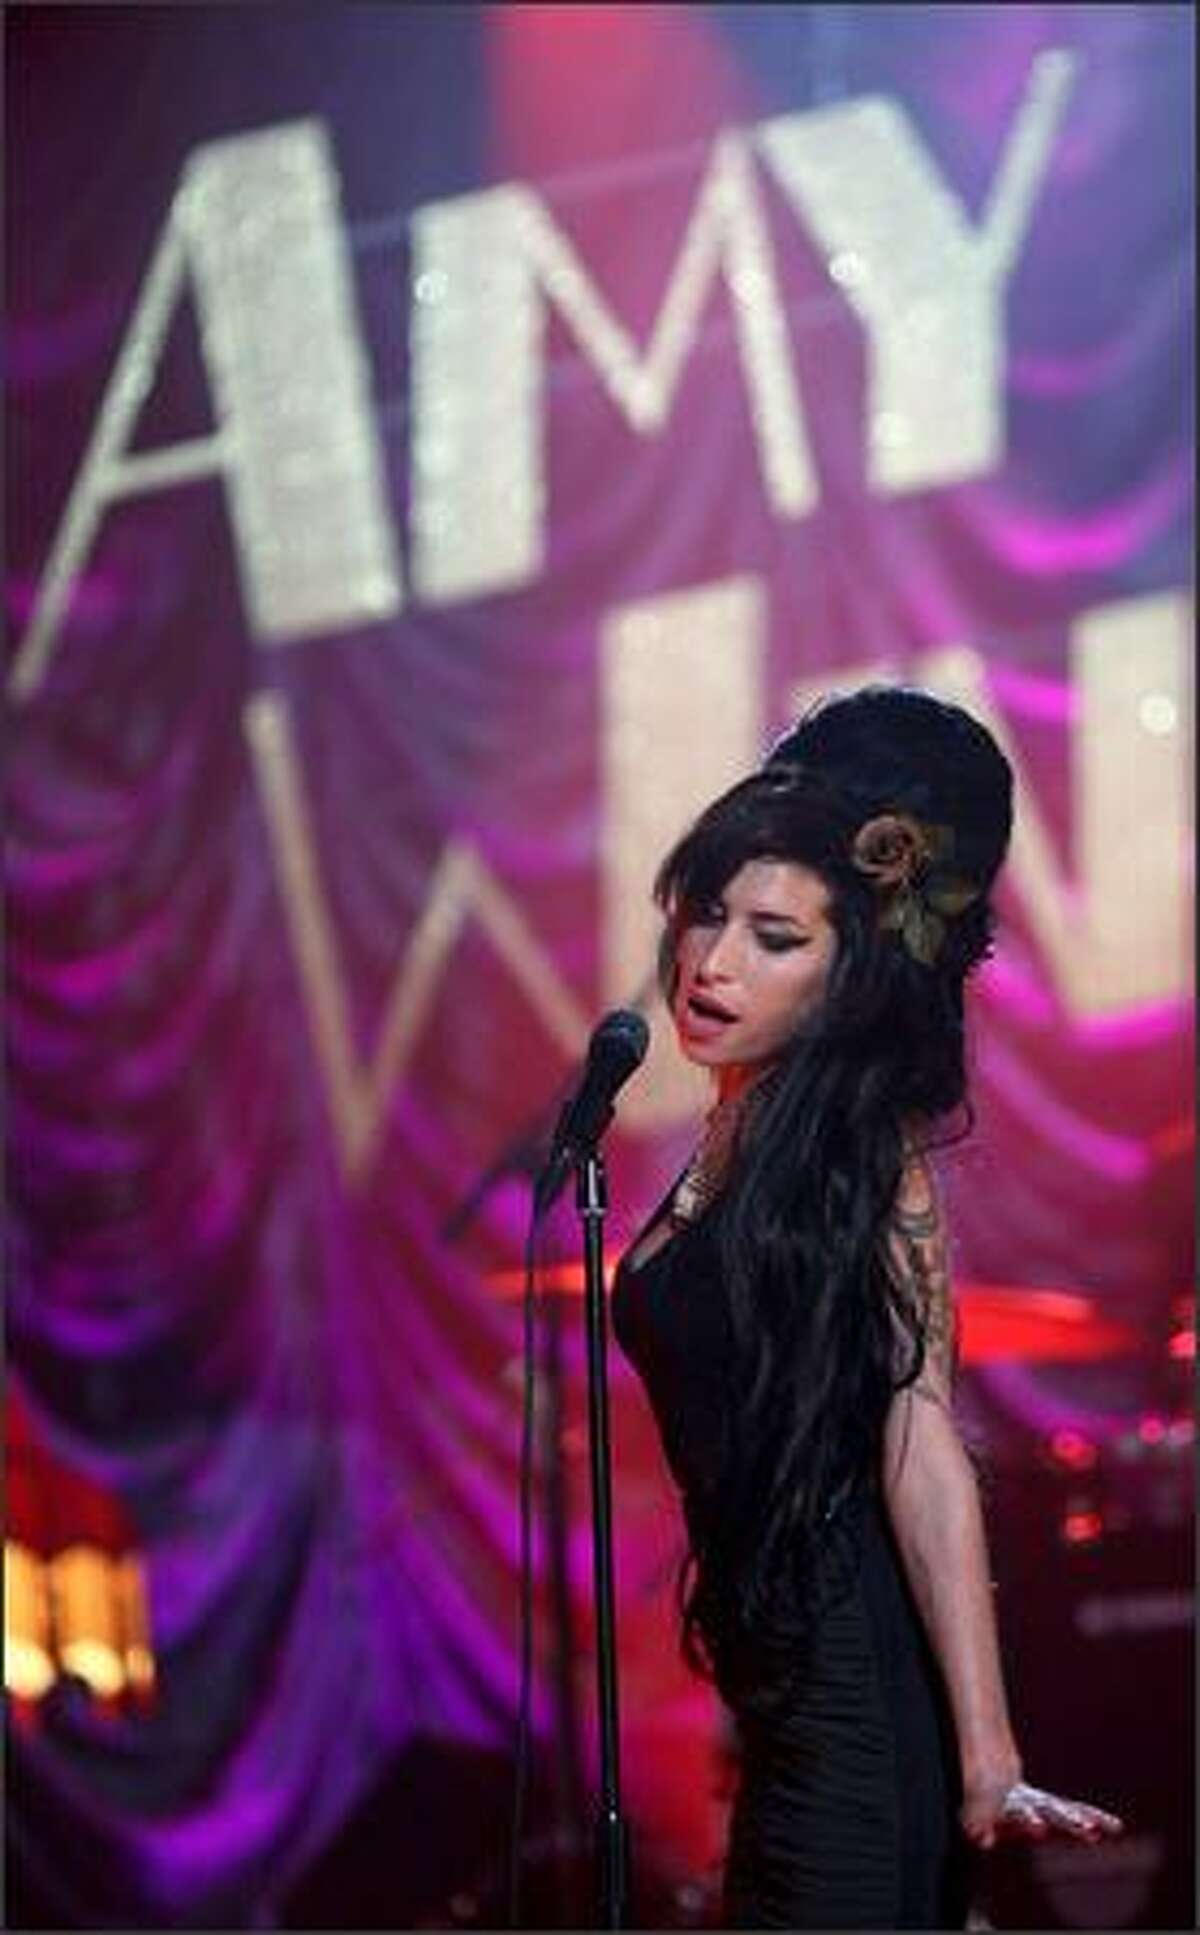 Amy Winehouse performs for the Grammy Awards via video link. Winehouse won five awards from her 6 nominations -- record of the year, best new artist, song of the year, pop vocal album and female pop vocal performance.